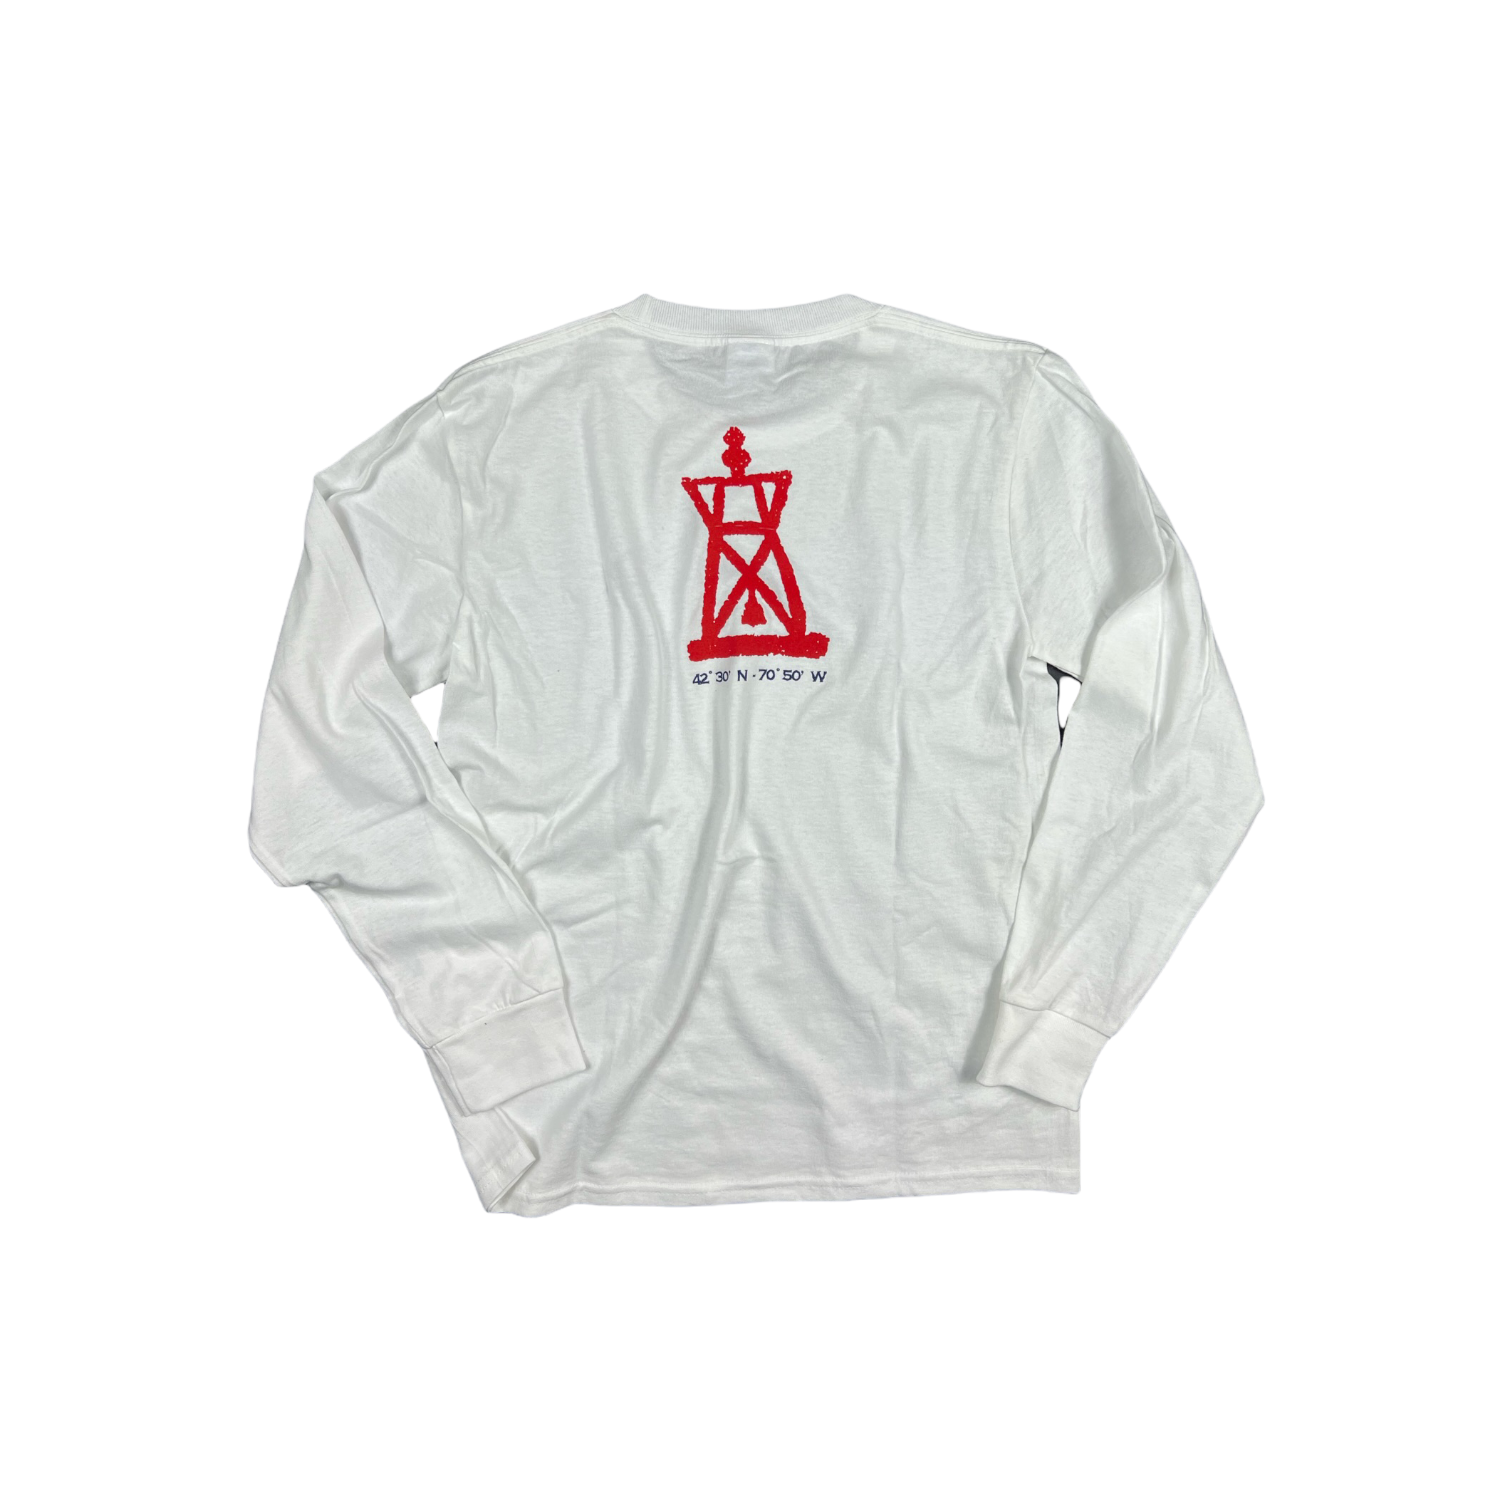 Youth L/S Tee - White